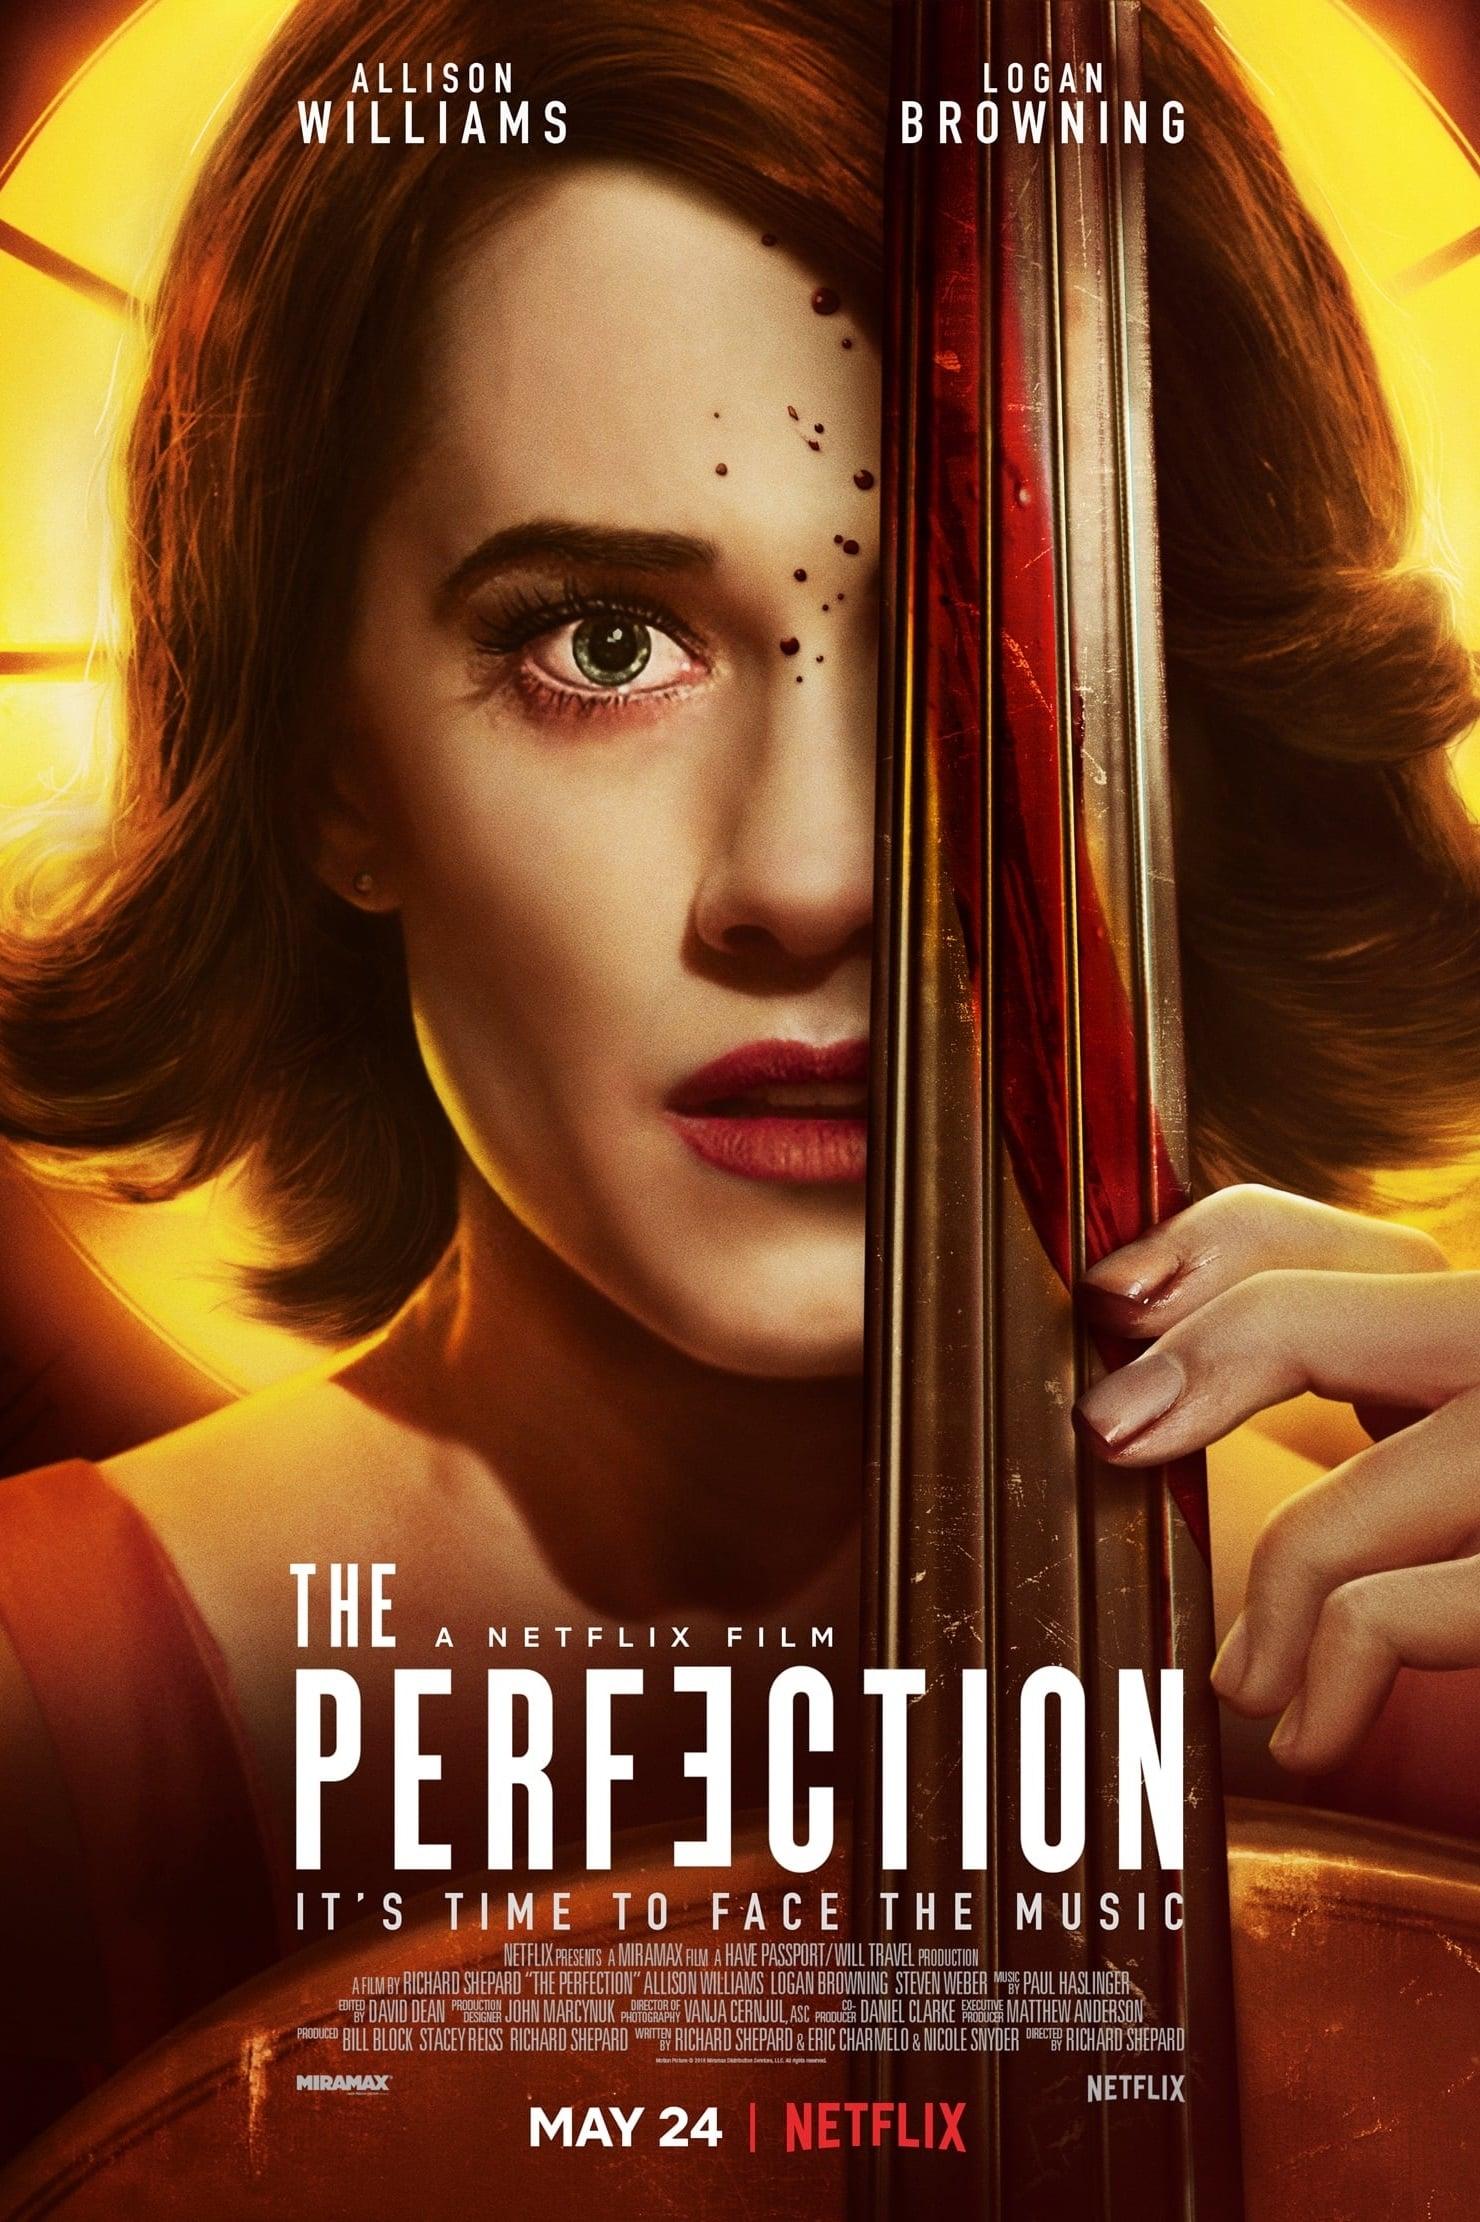 The Perfection poster